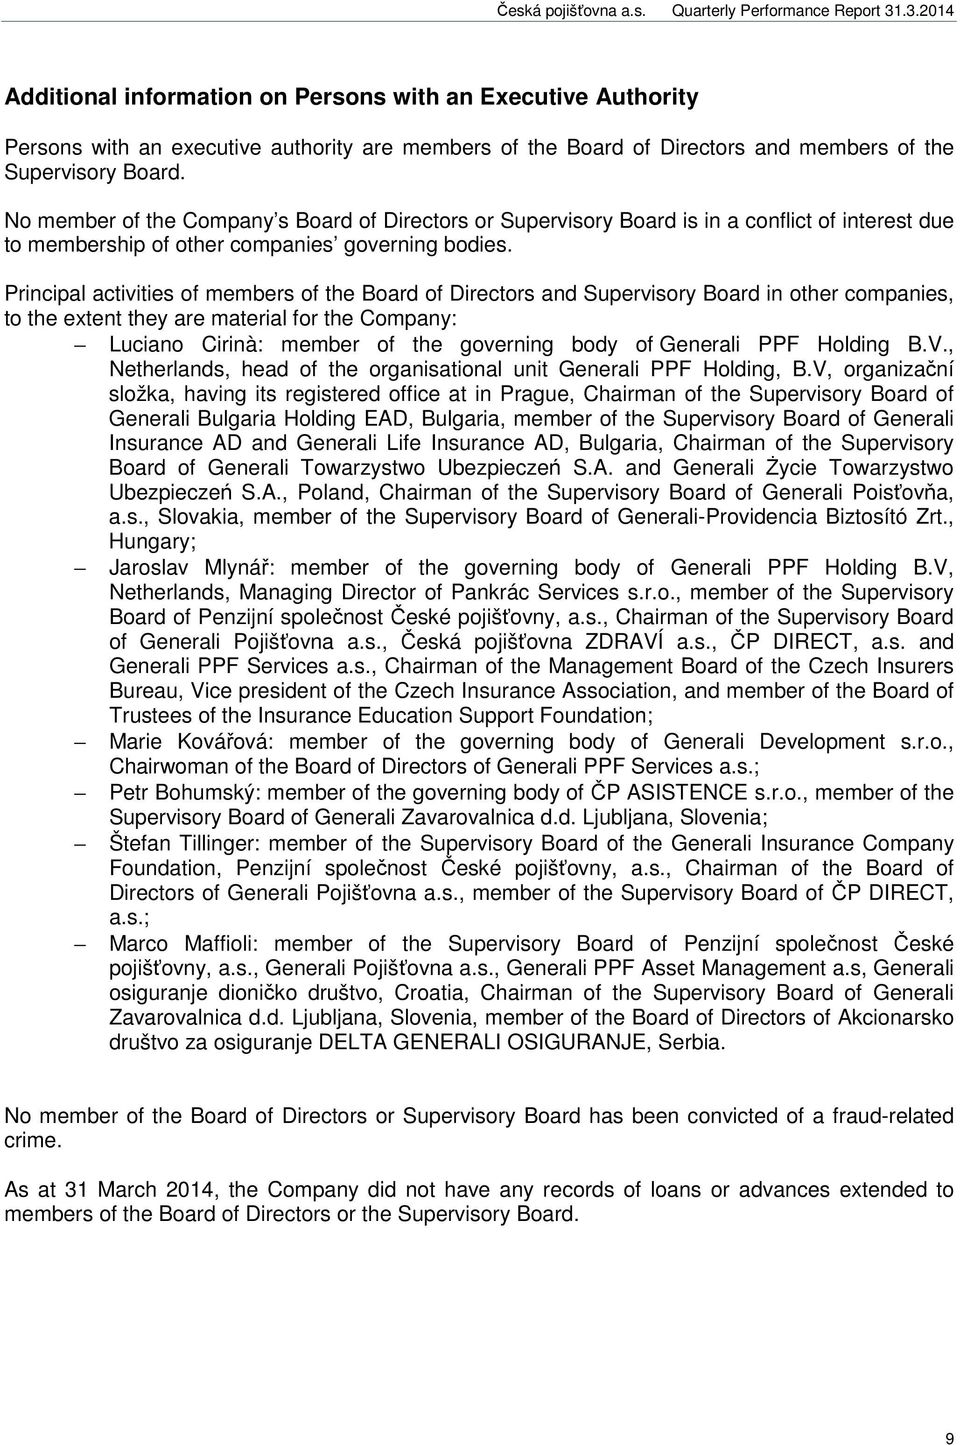 Principal activities of members of the Board of Directors and Supervisory Board in other companies, to the extent they are material for the Company: Luciano Cirinà: member of the governing body of